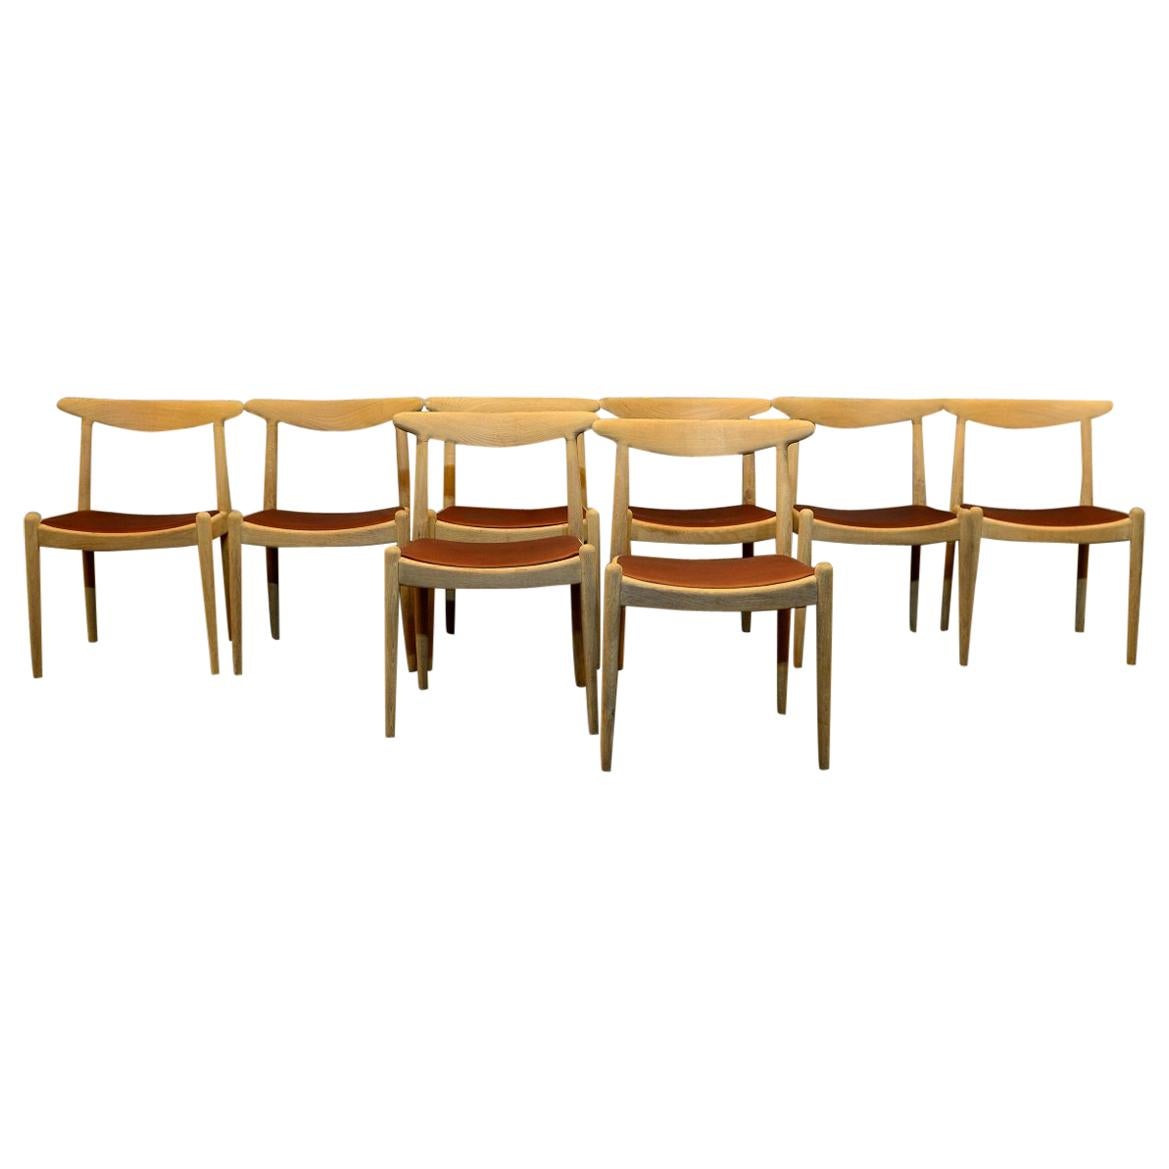 Set of 8 W1 Oak and Leather Chairs by Hans J. Wegner, 1950s, C.M. Madsens DK For Sale